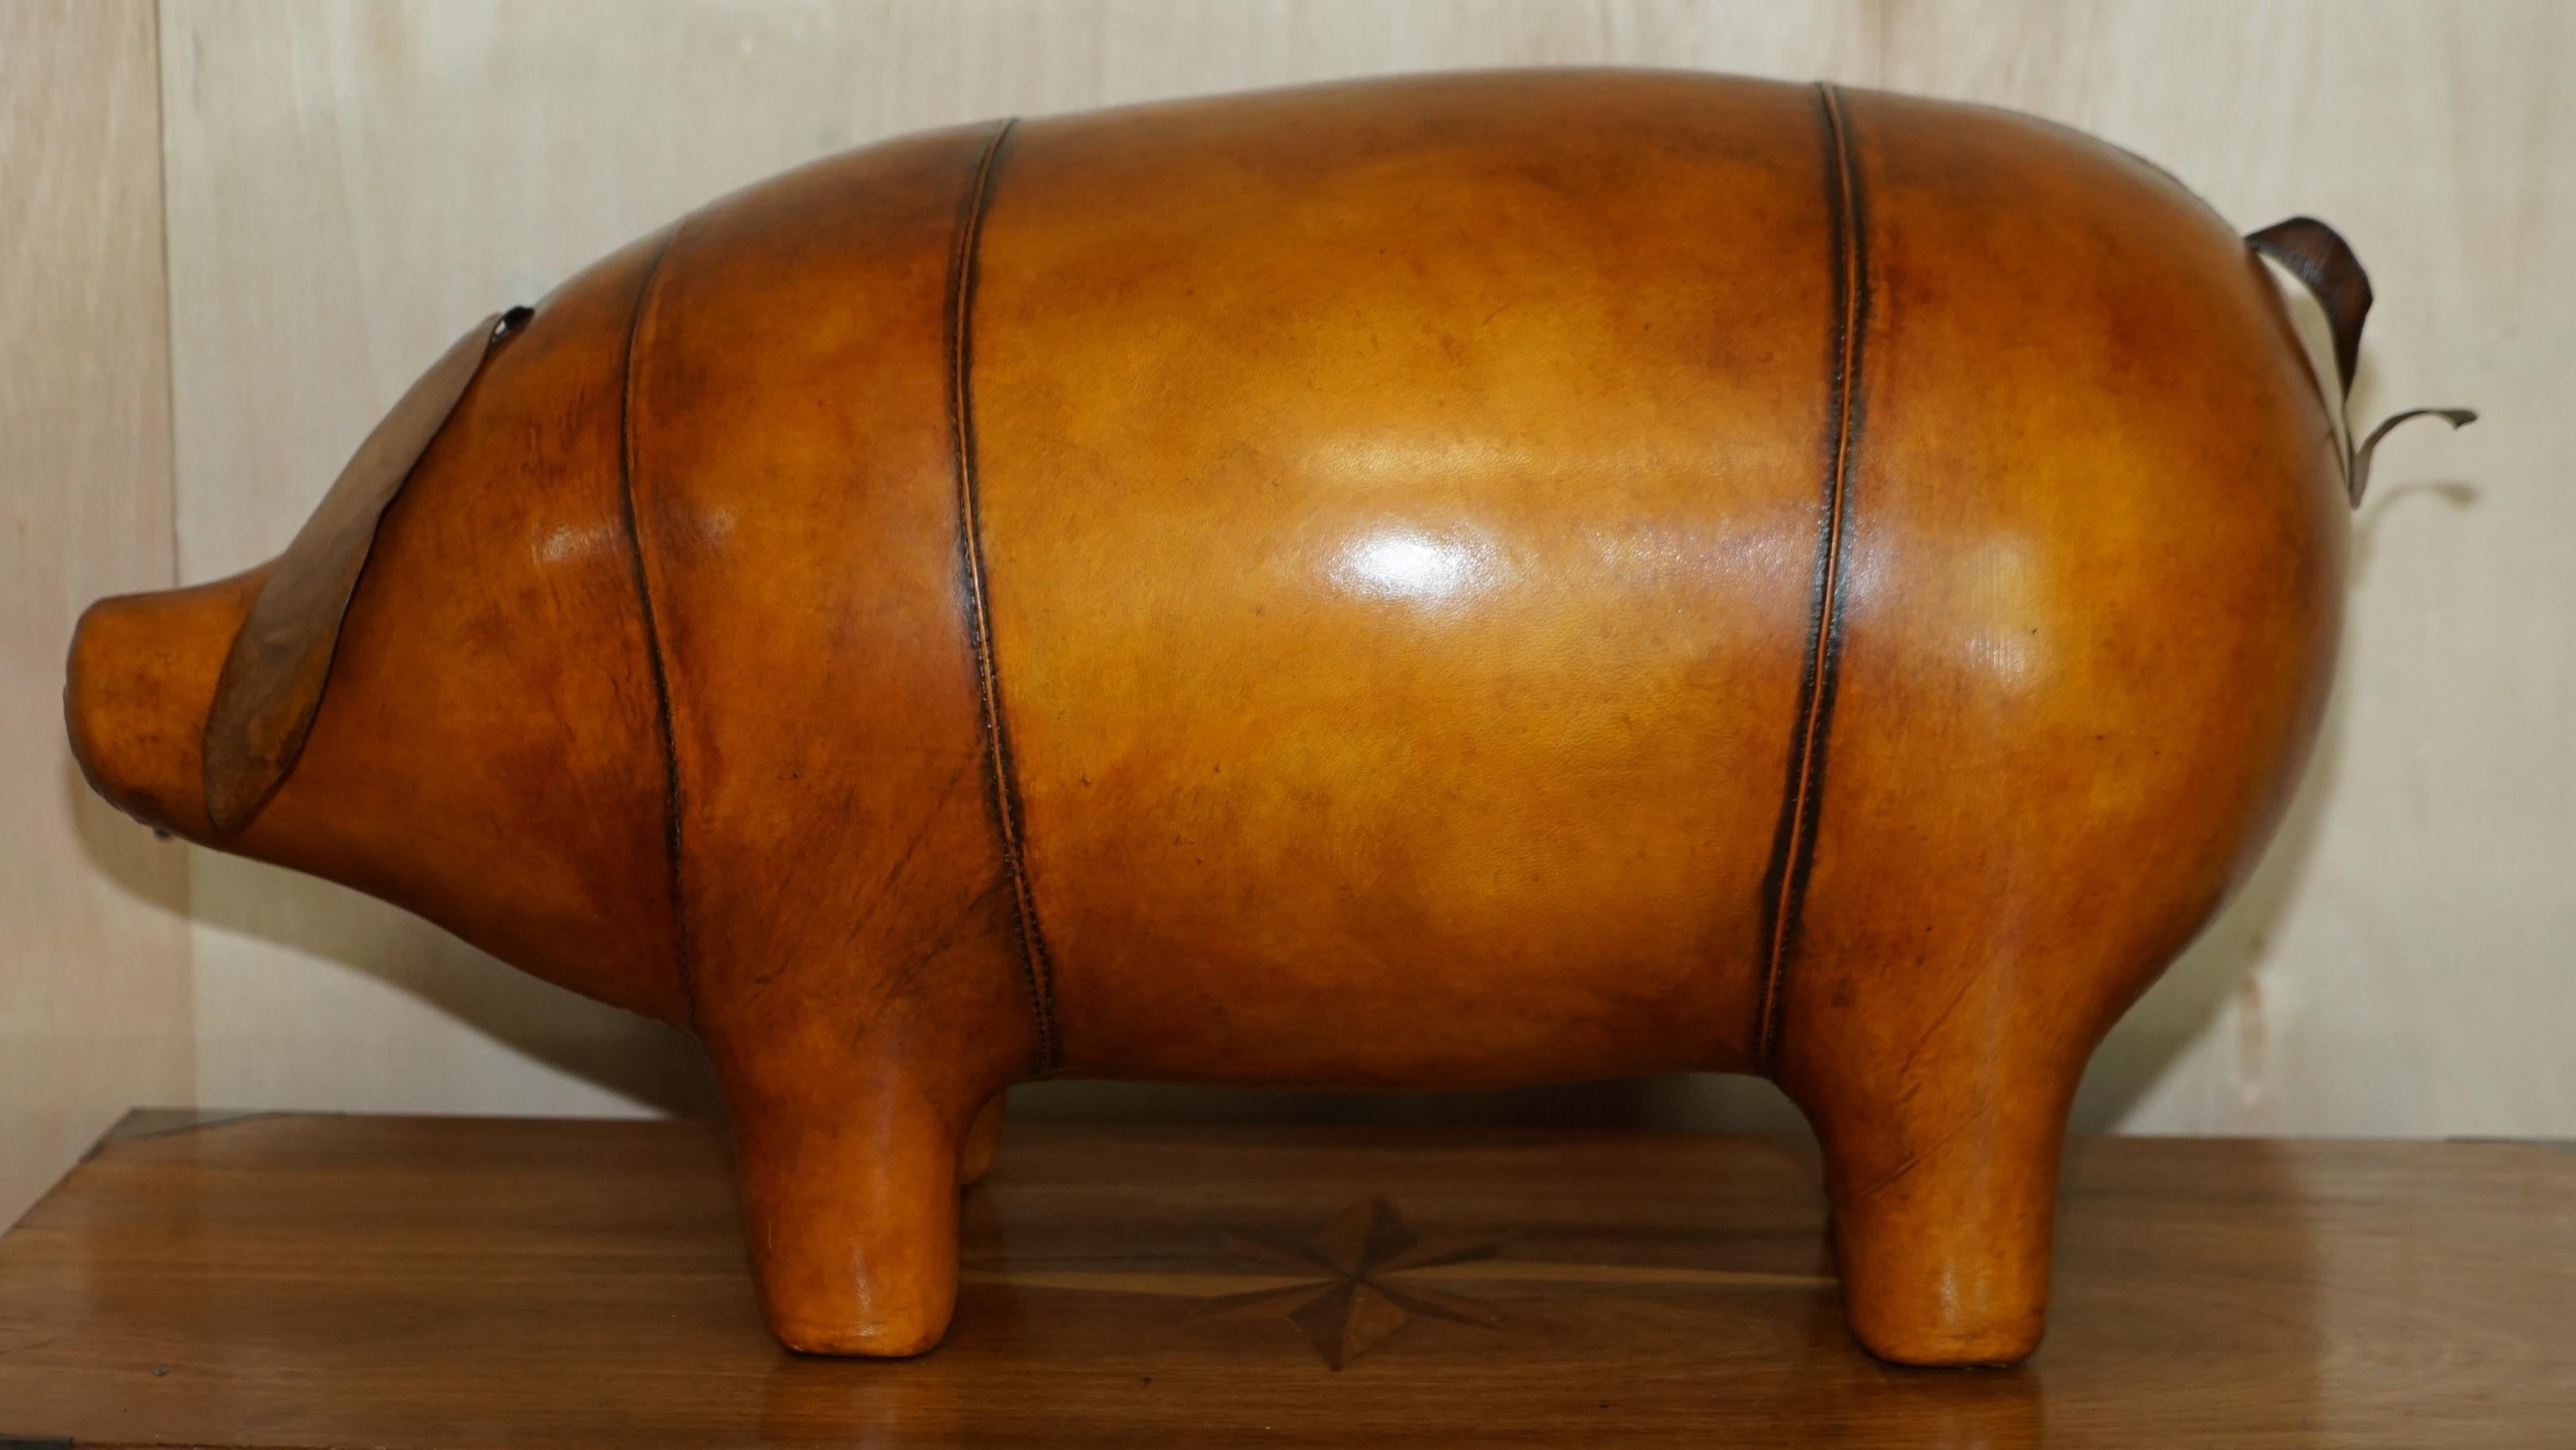 NEUES OLD STOCK LIBERTY Style OMERSA BROWN LEATHER PIG FOOTSTOOL LARGE AND MEDiUM im Angebot 2